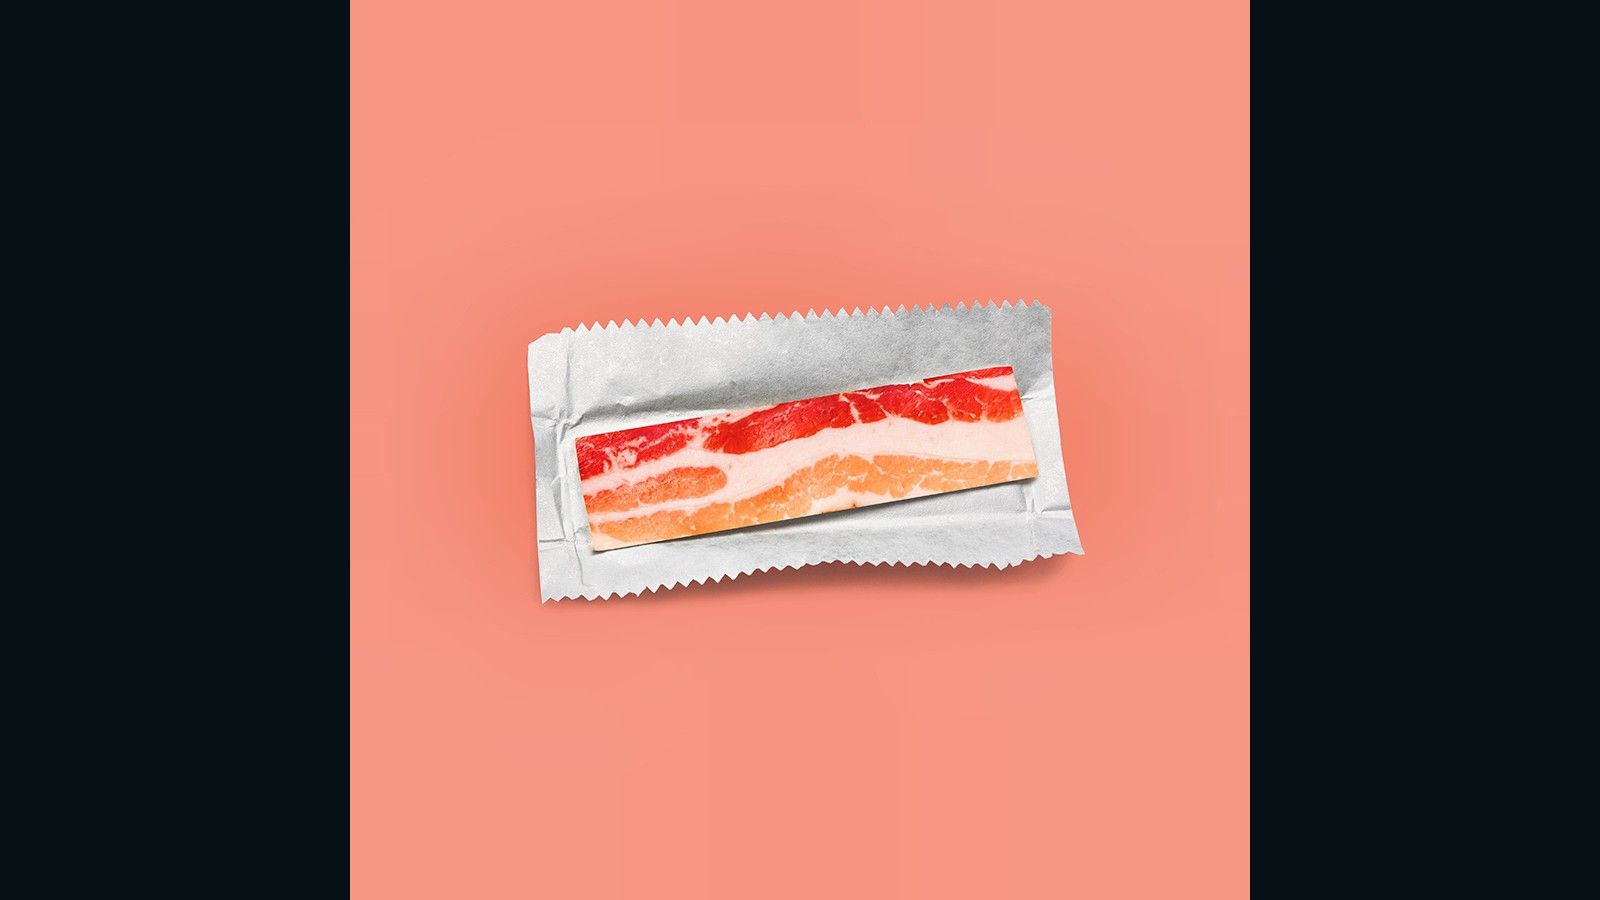 A slice of bacon in a package - Foodie